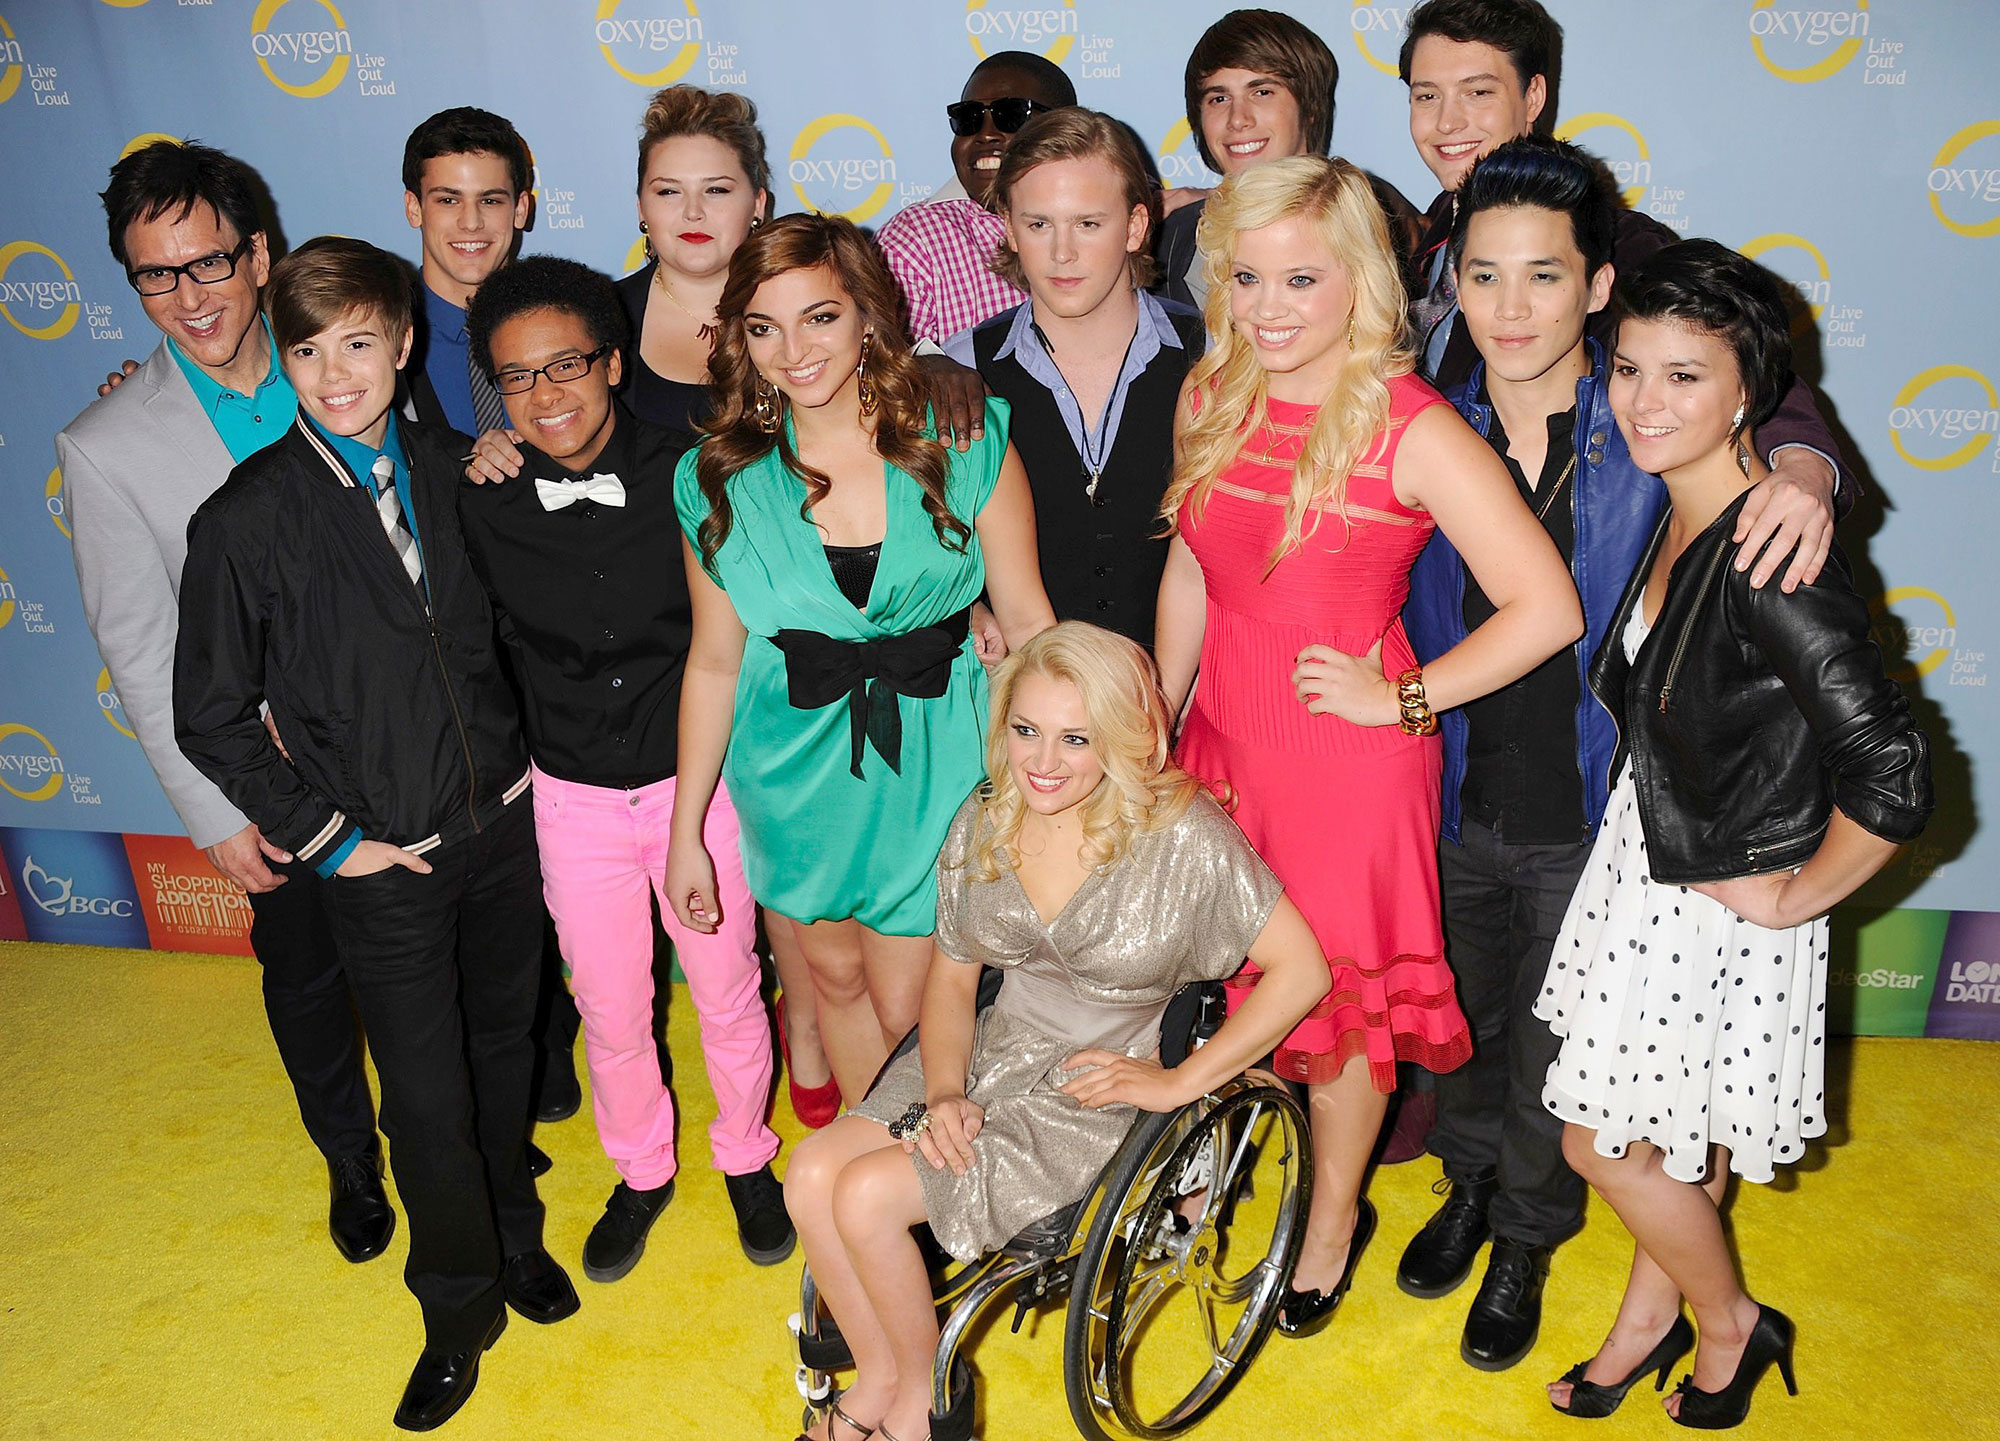 The Glee Project Alums Detail Traumatic Experience on the Show